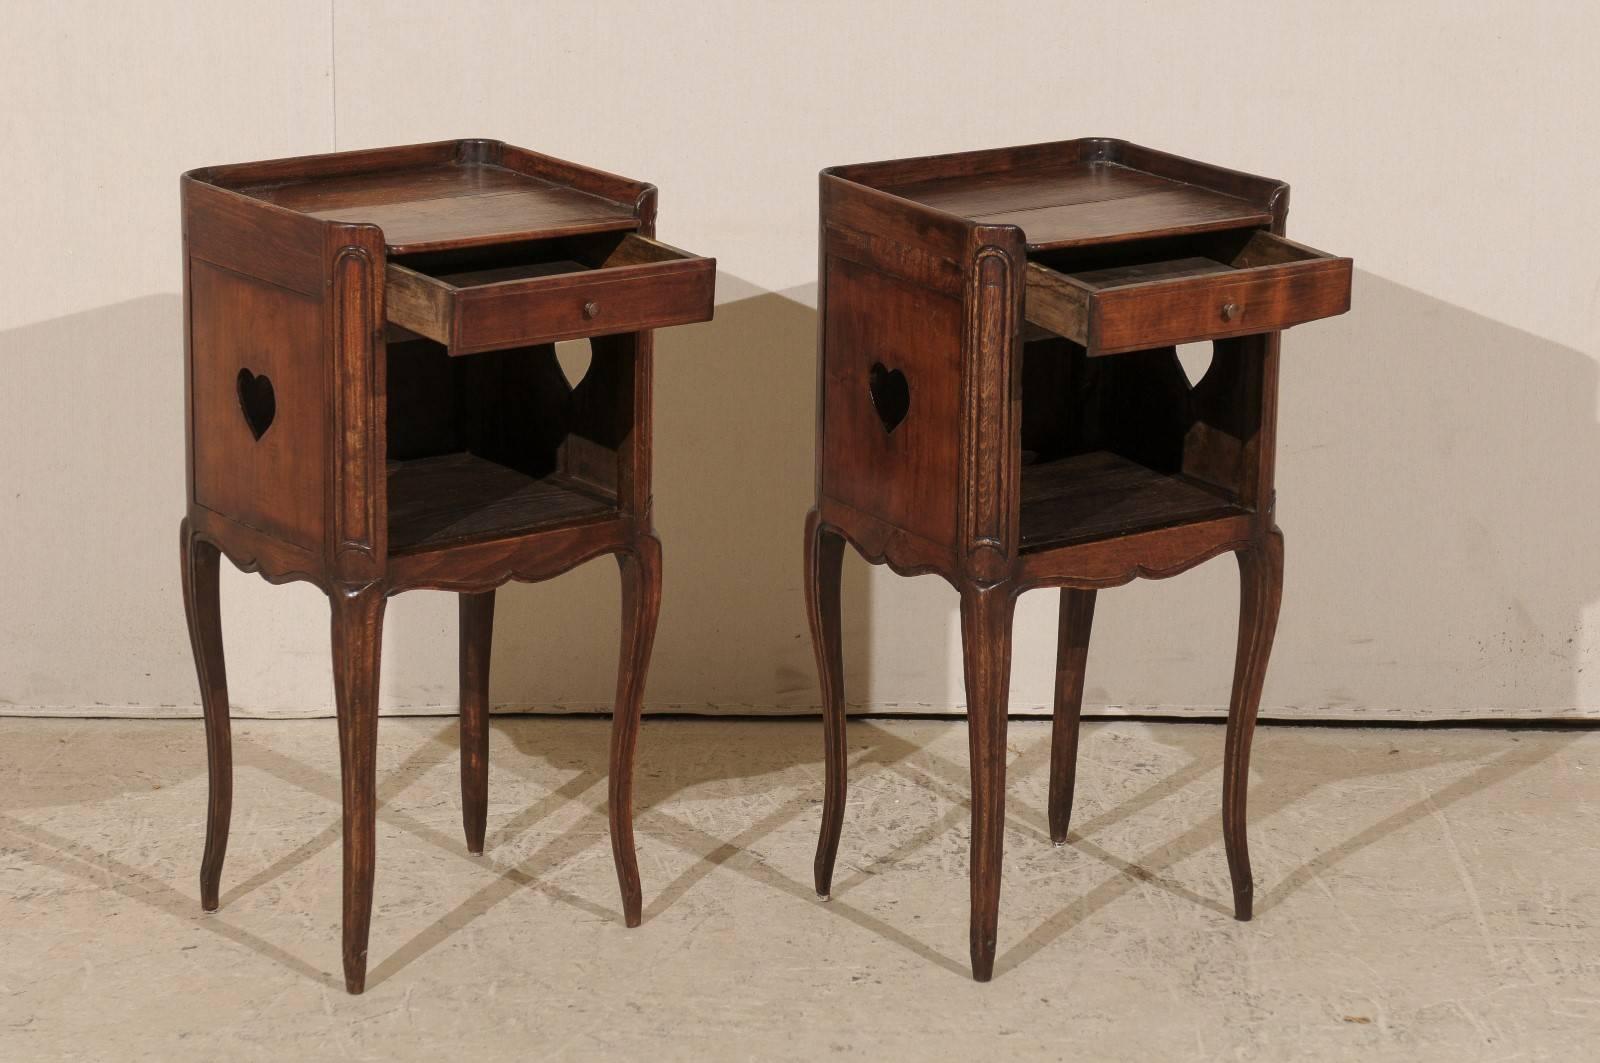 Pair of French Stained Wood Side Tables or Nightstands in Warm Cabernet Mahogany 1